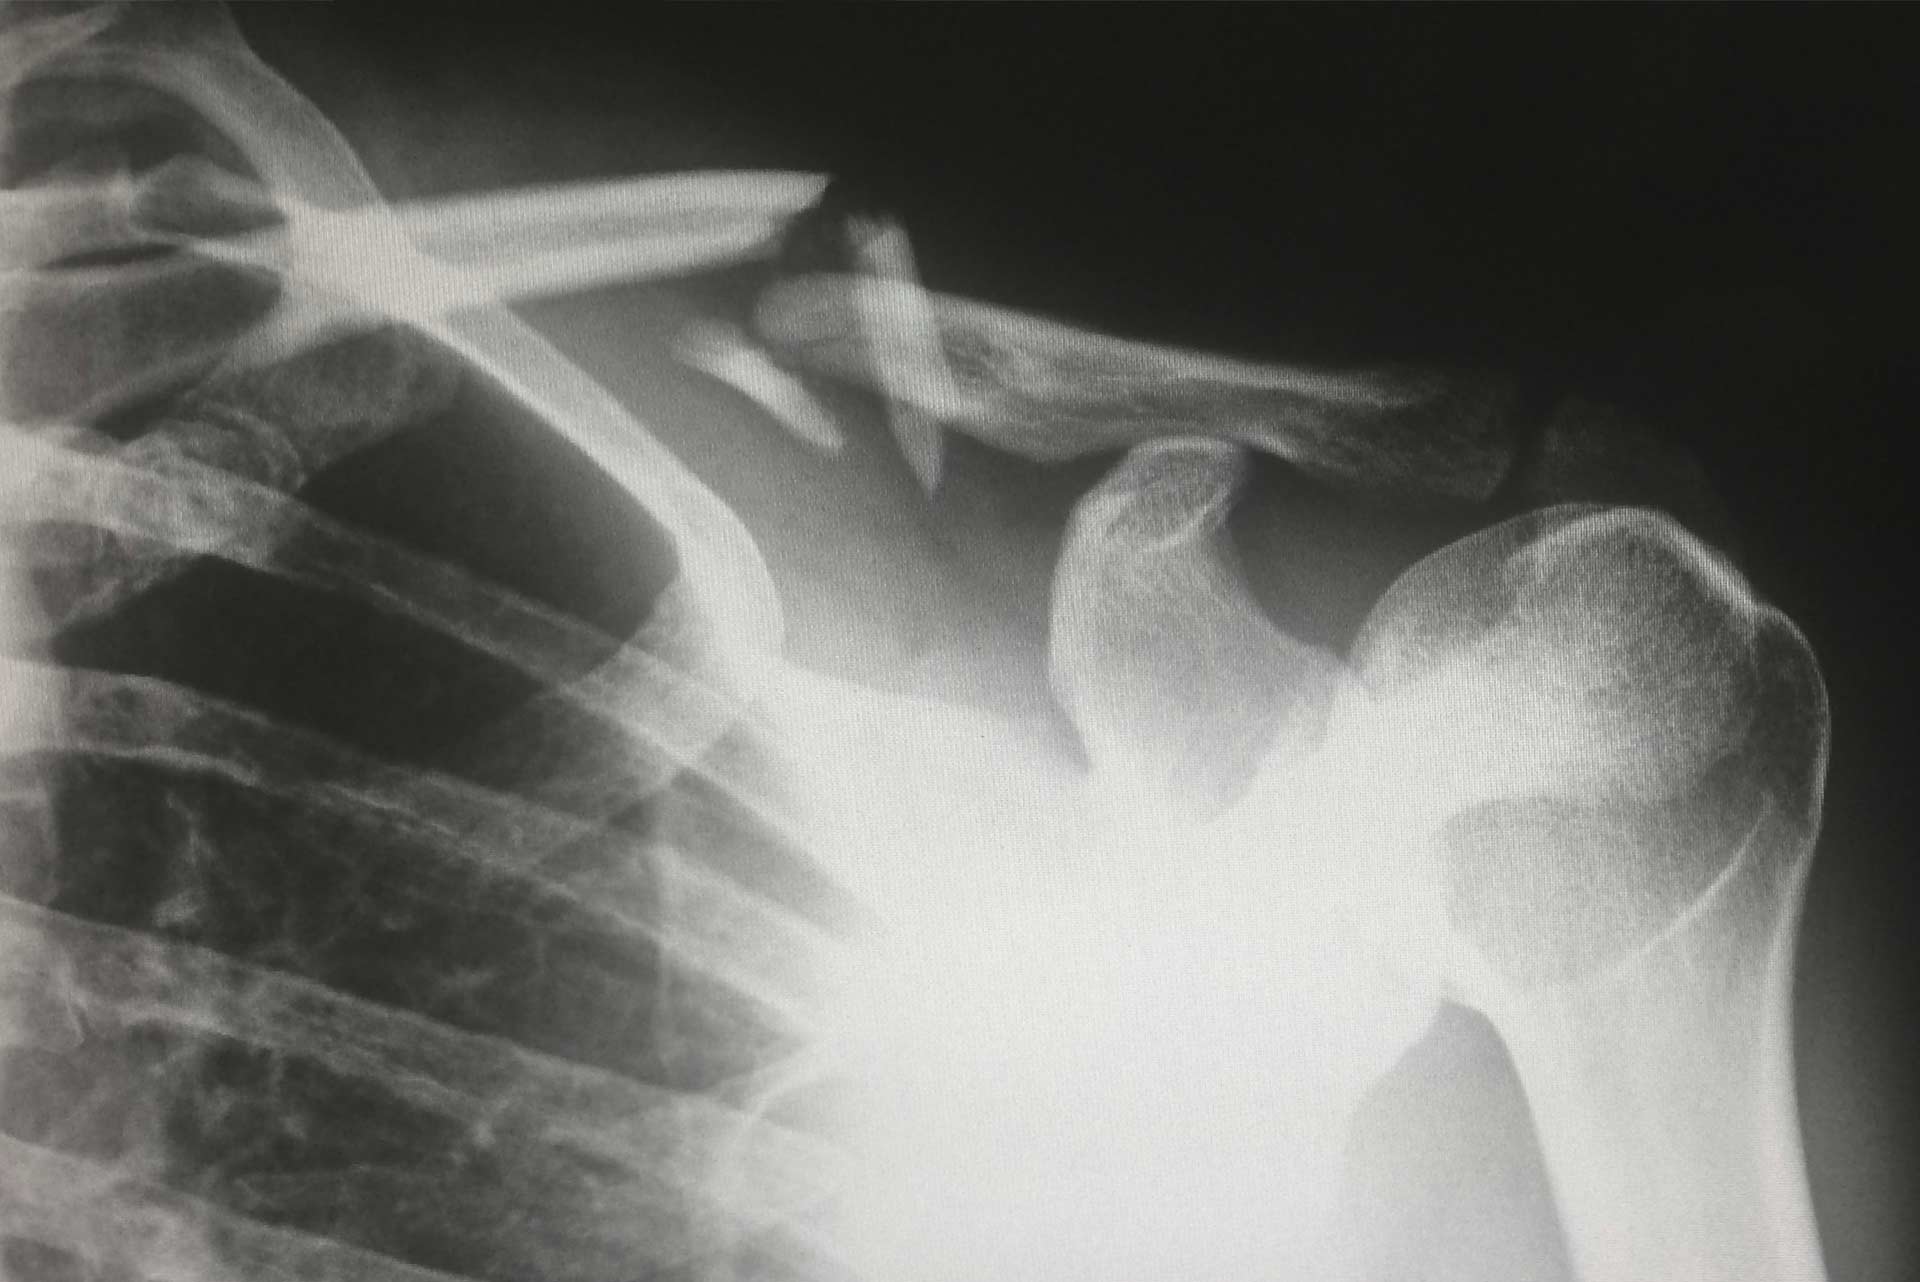 x-ray image of Broken Clavicle also known as the collarbone